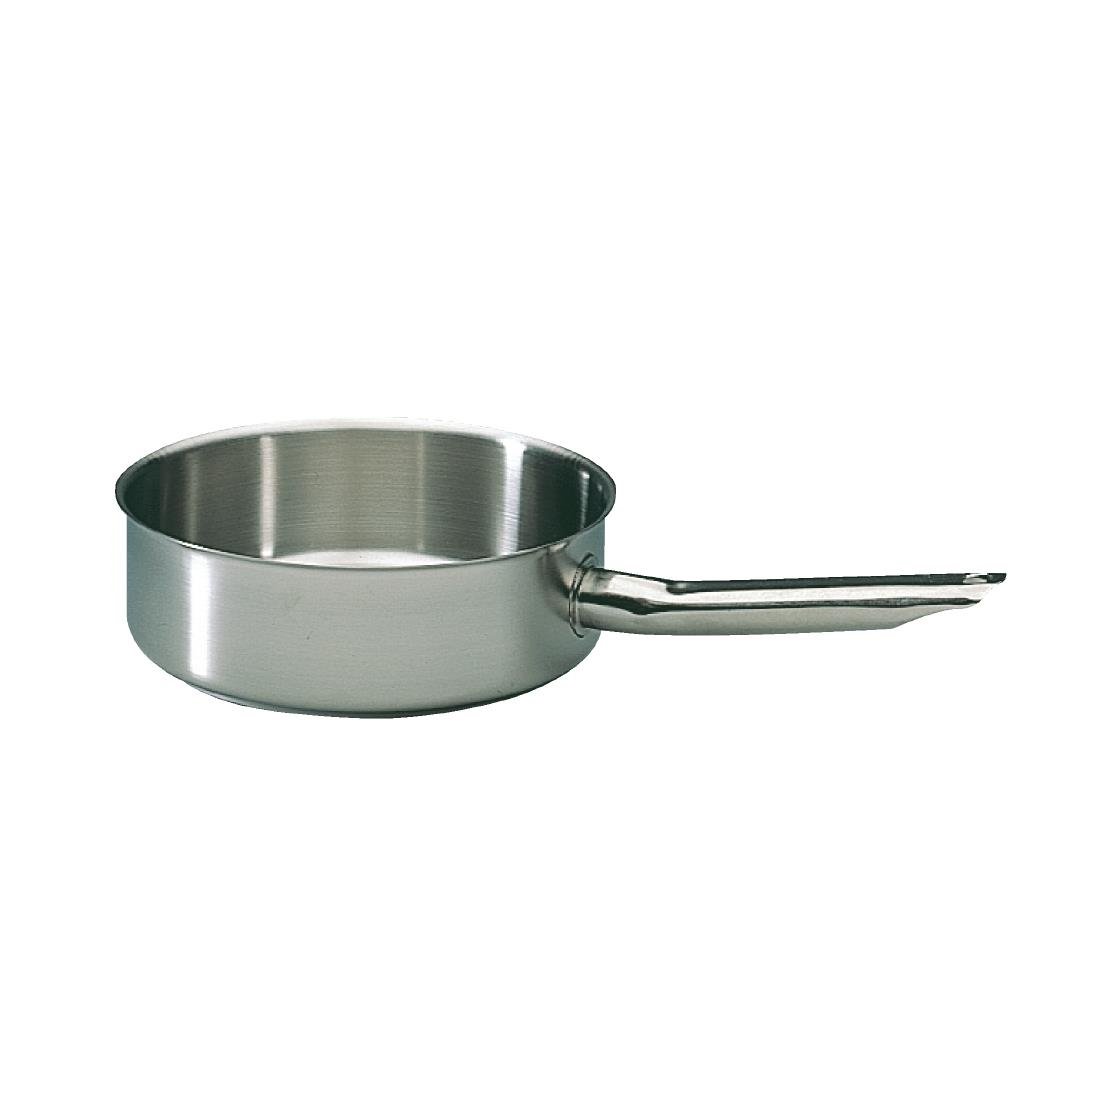 Bourgeat Excellence Saute Pan 280mm K780 JD Catering Equipment Solutions Ltd